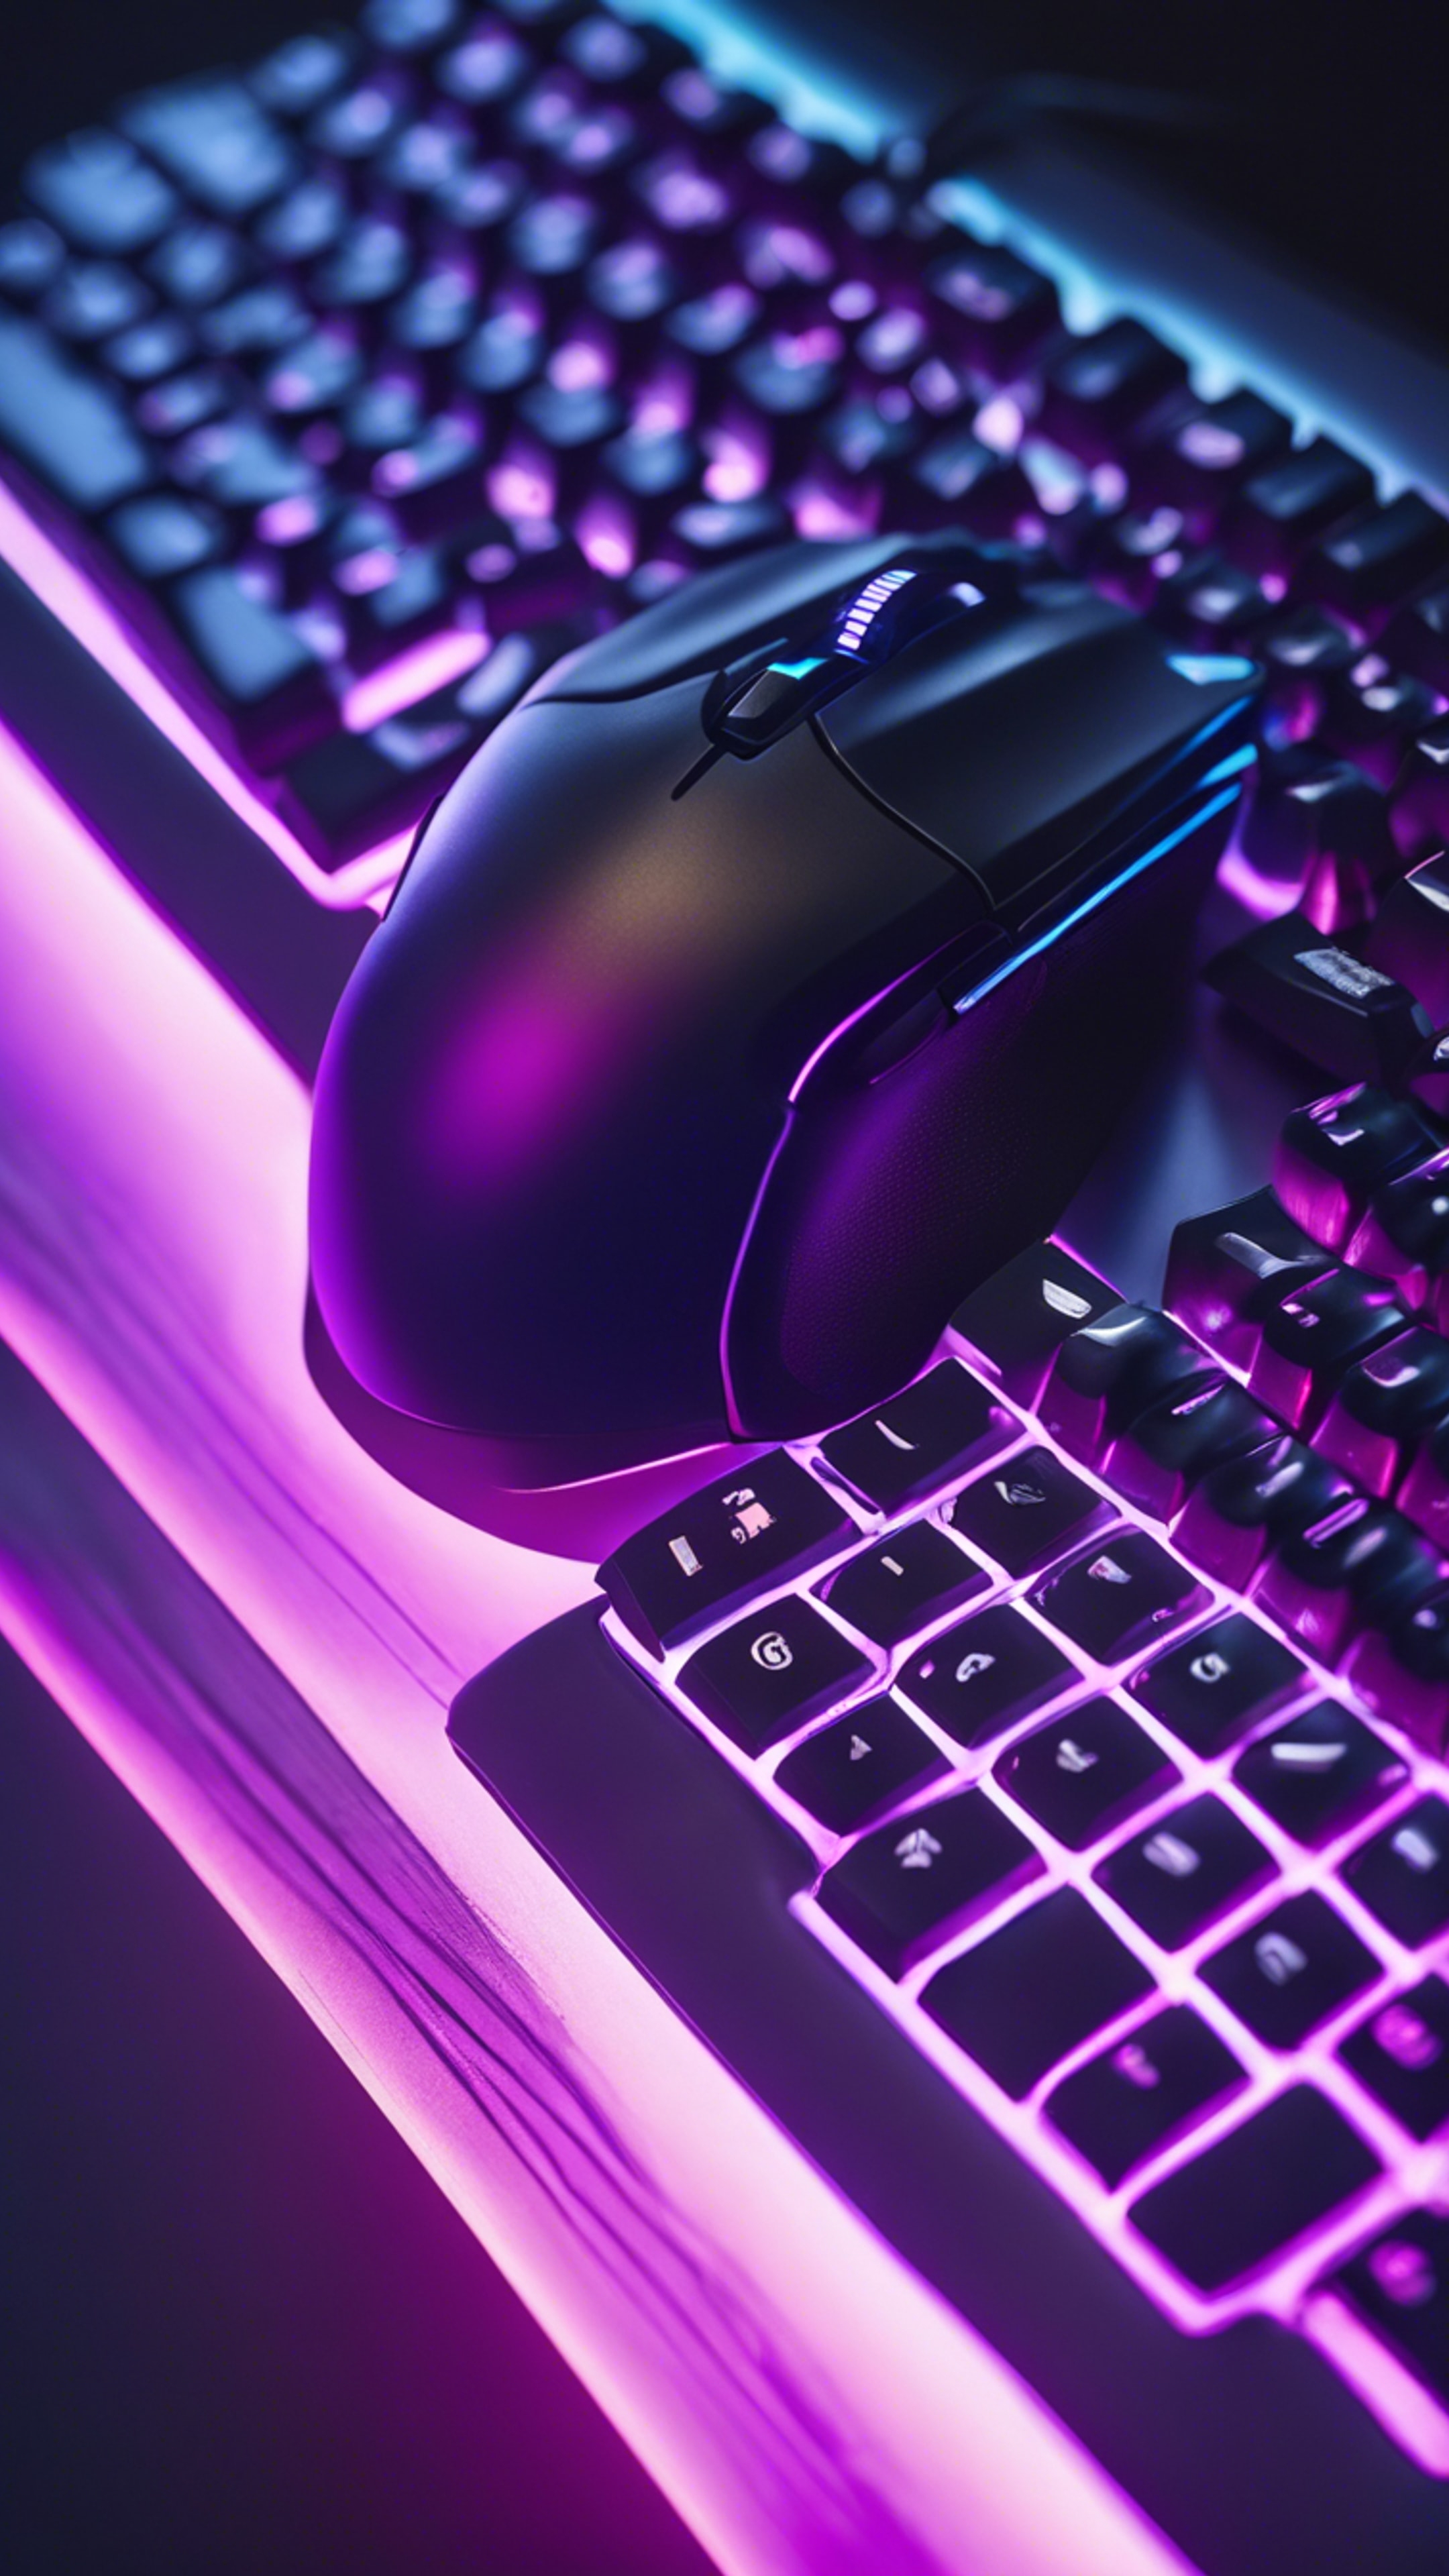 A top down view of a gaming keyboard and mouse bathed in a soothing gradient of blue to purple backlighting. 墙纸[d1c9d3144afe4da3b536]